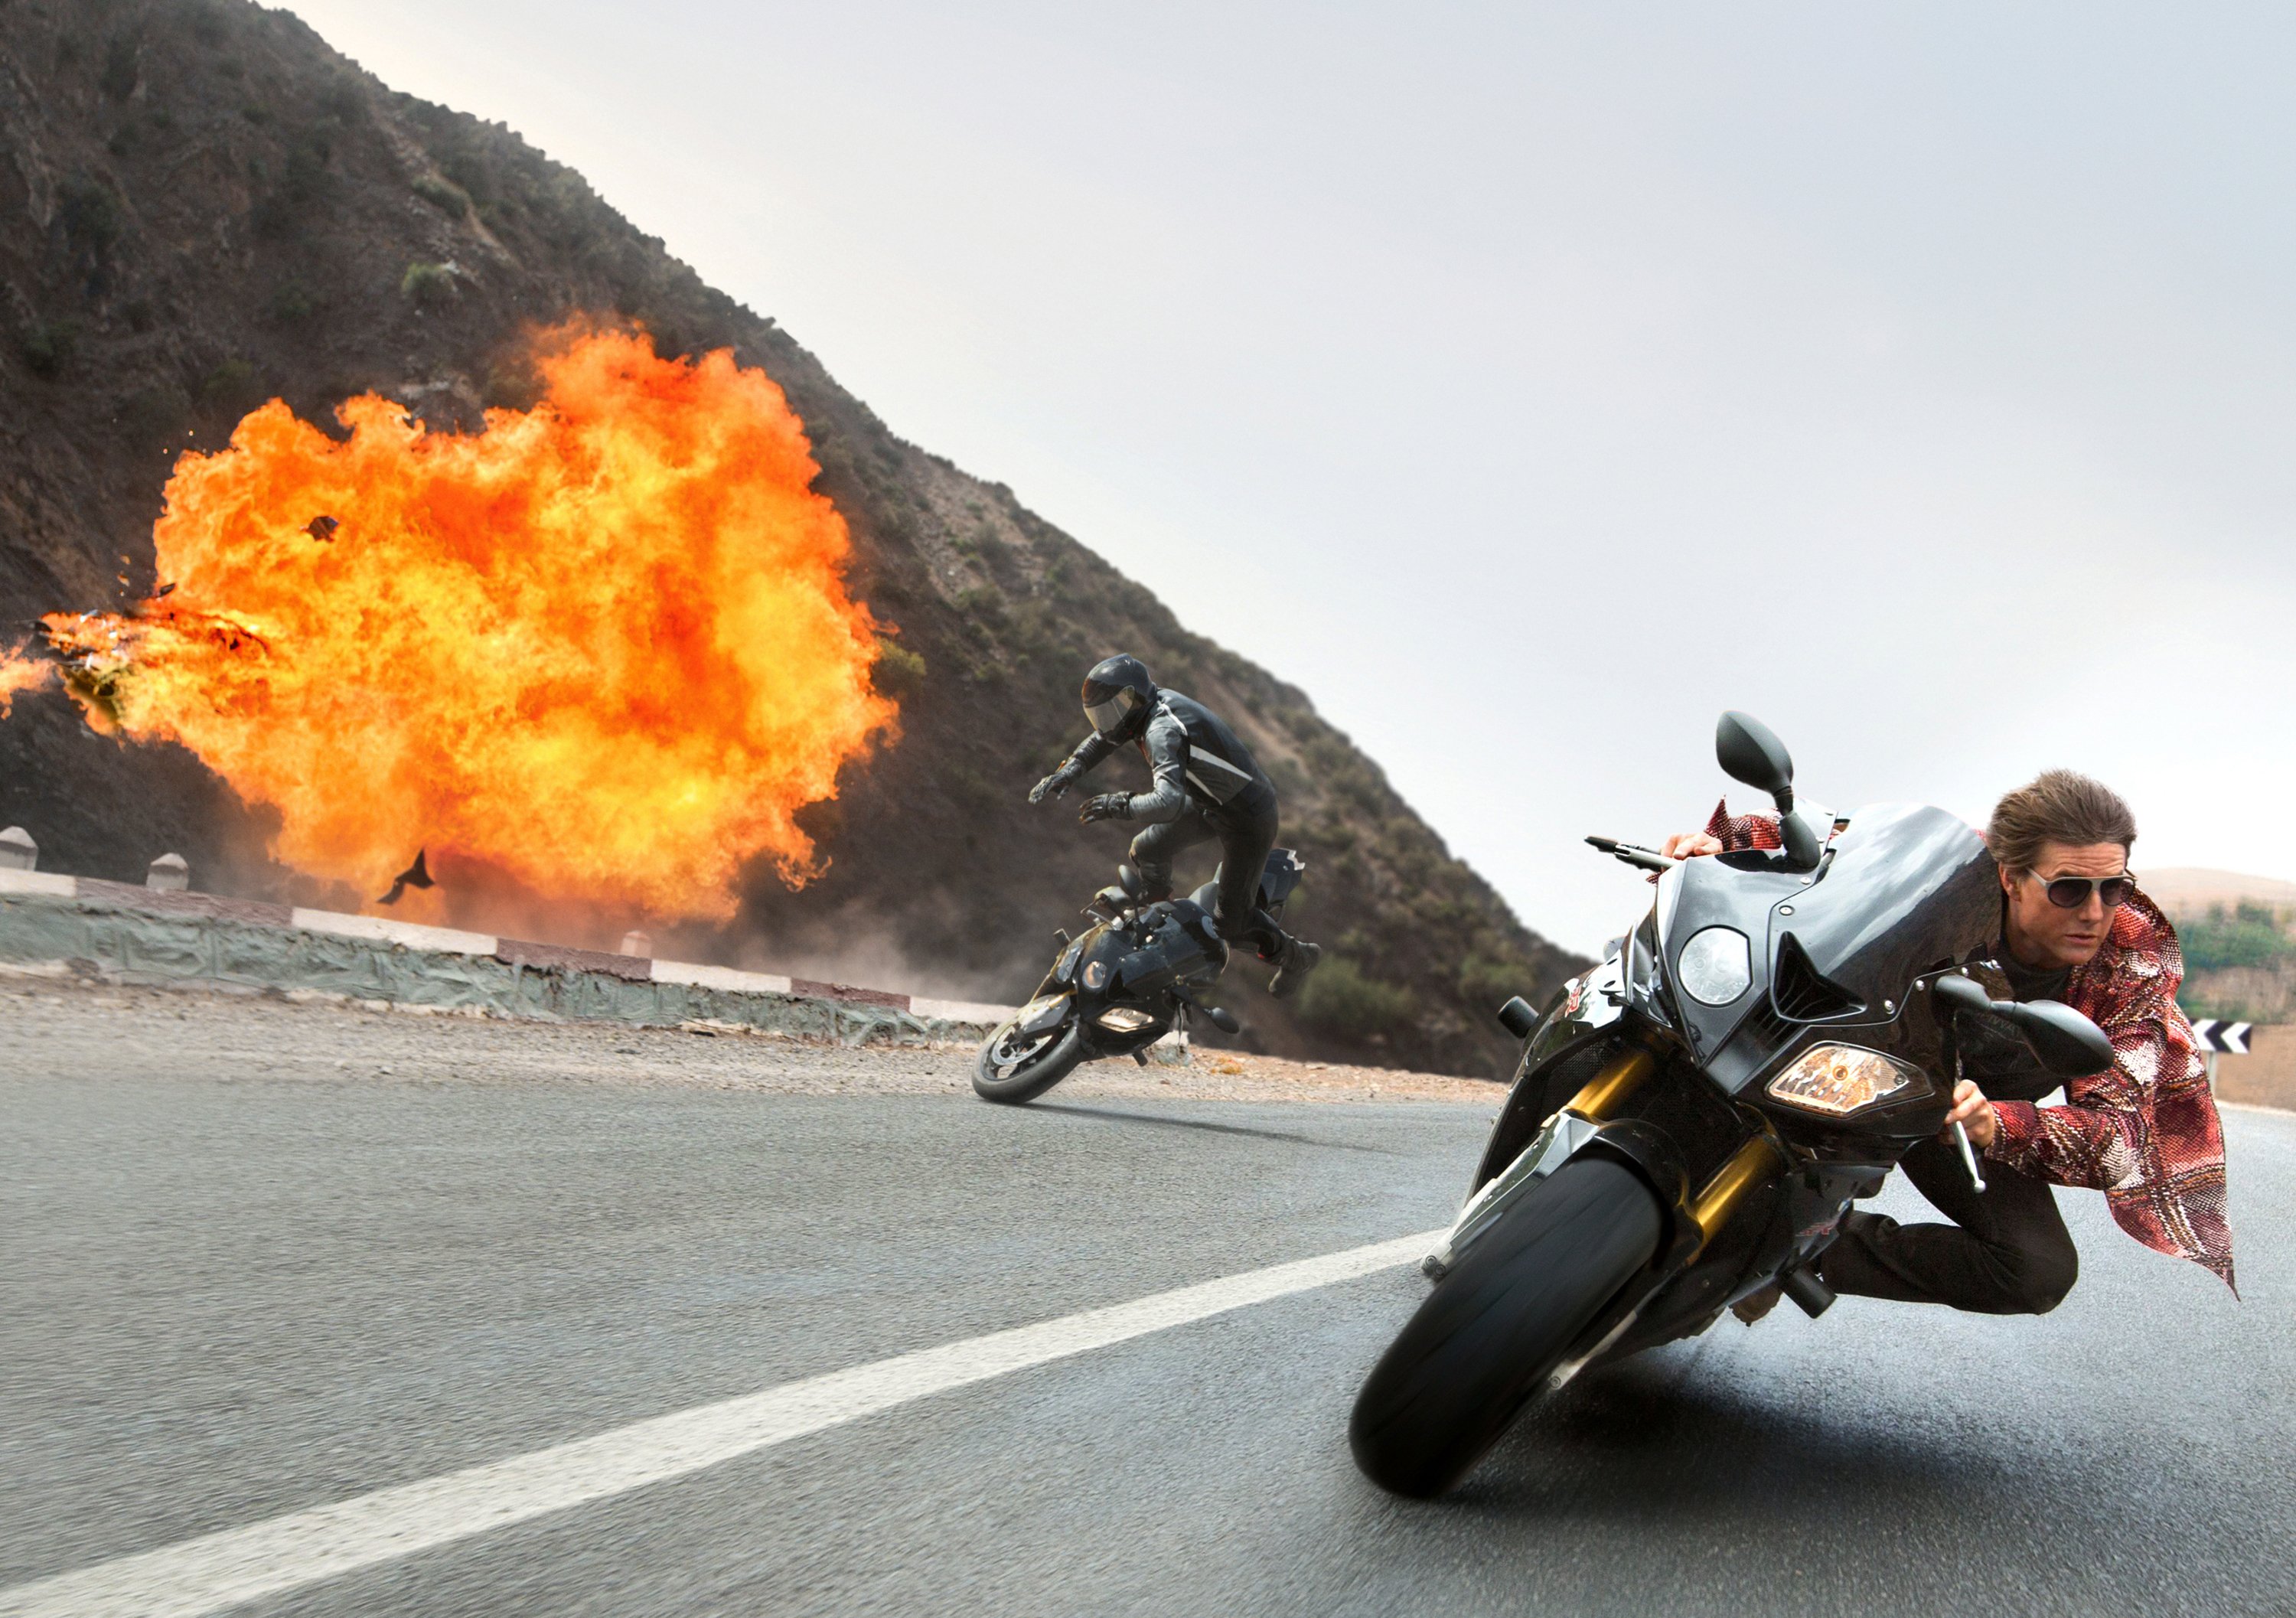 BMW alleata di Tom Cruise in Mission Impossible: Rogue Nation